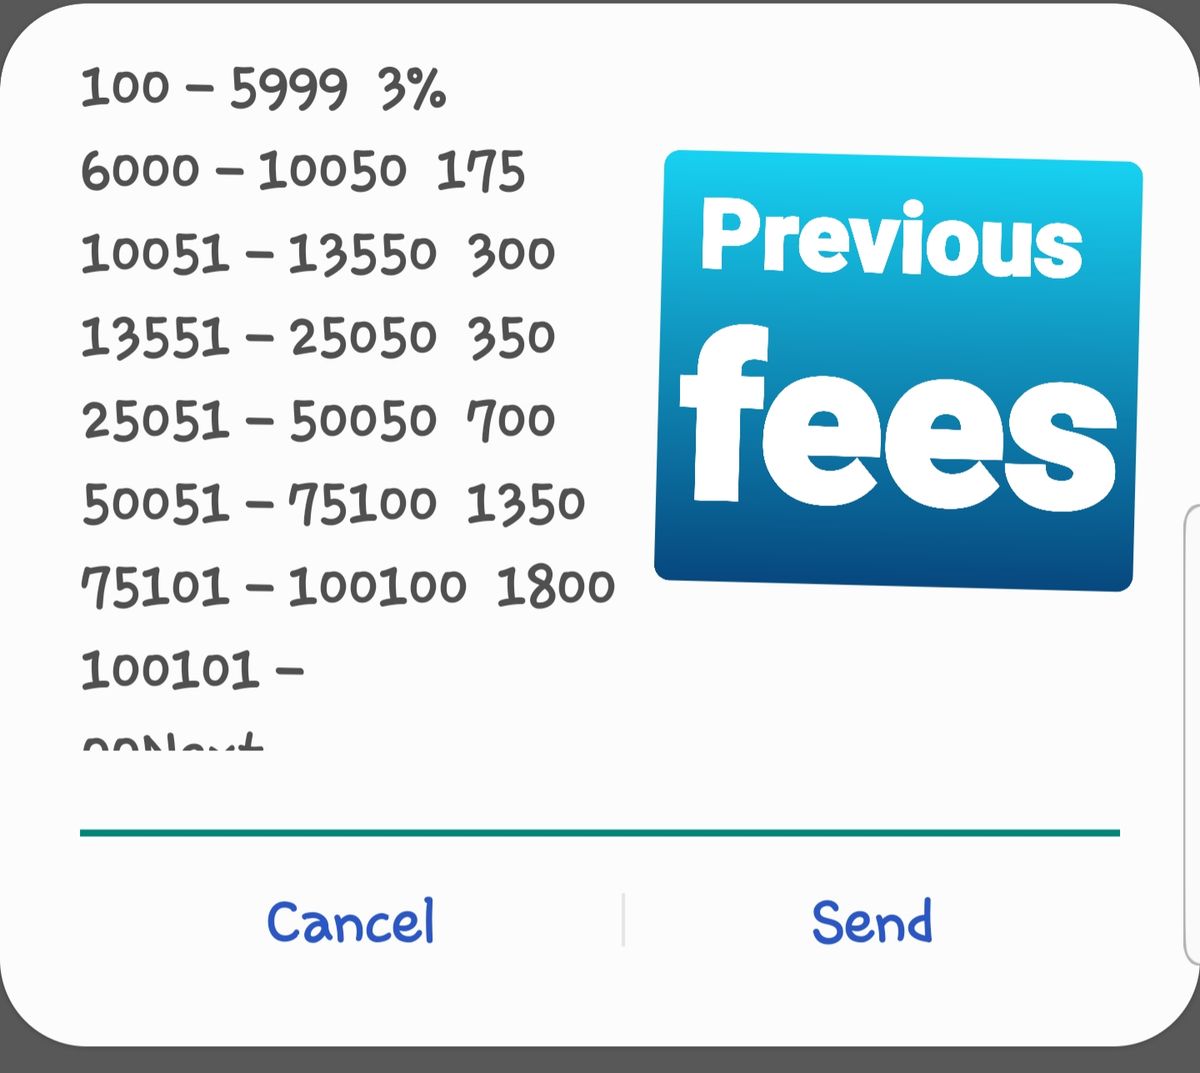 Previous Momo fees from 100 frs to 100,100 frs